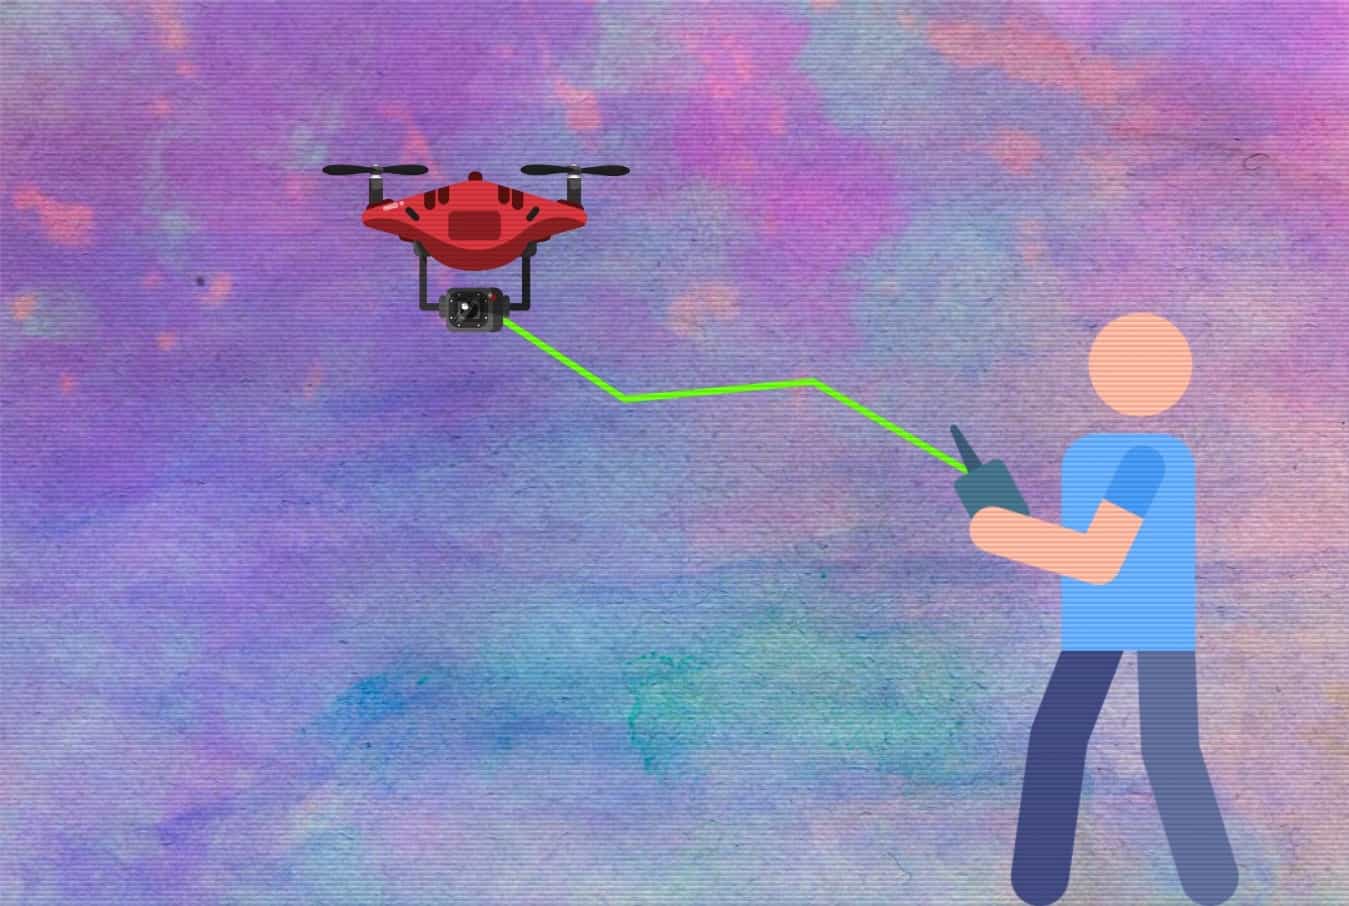 Locating malicious drone operators through deep neural networks